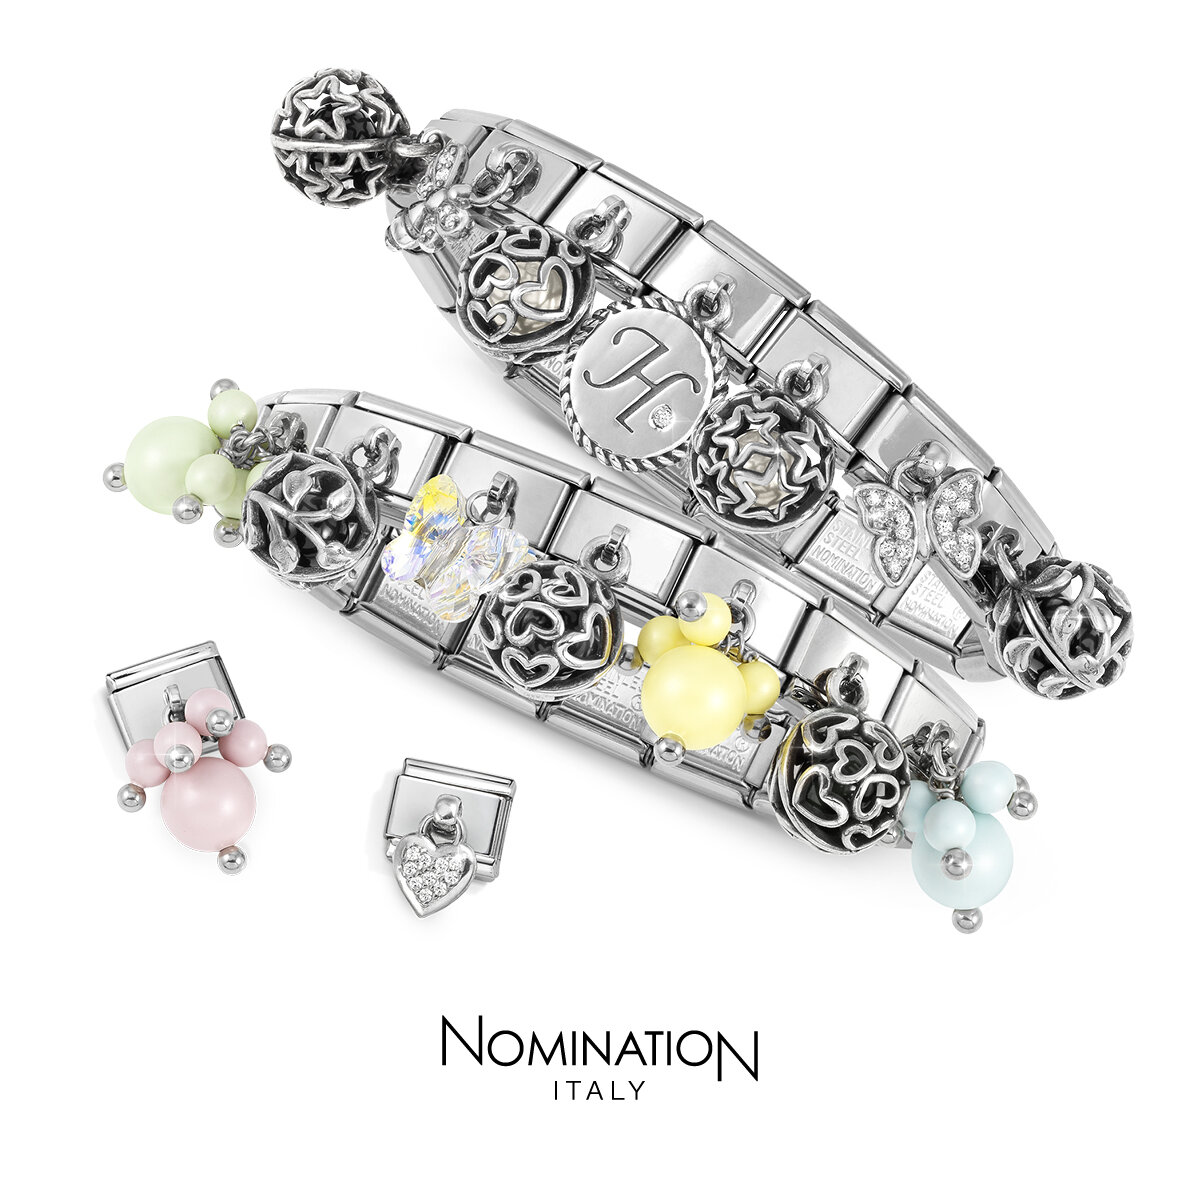 Nomination Italy - Muscat - Extension Bracelet with semi precious stone in  18k gold design. @nominationitalyofficial @nomination.italy.fanpage |  Facebook